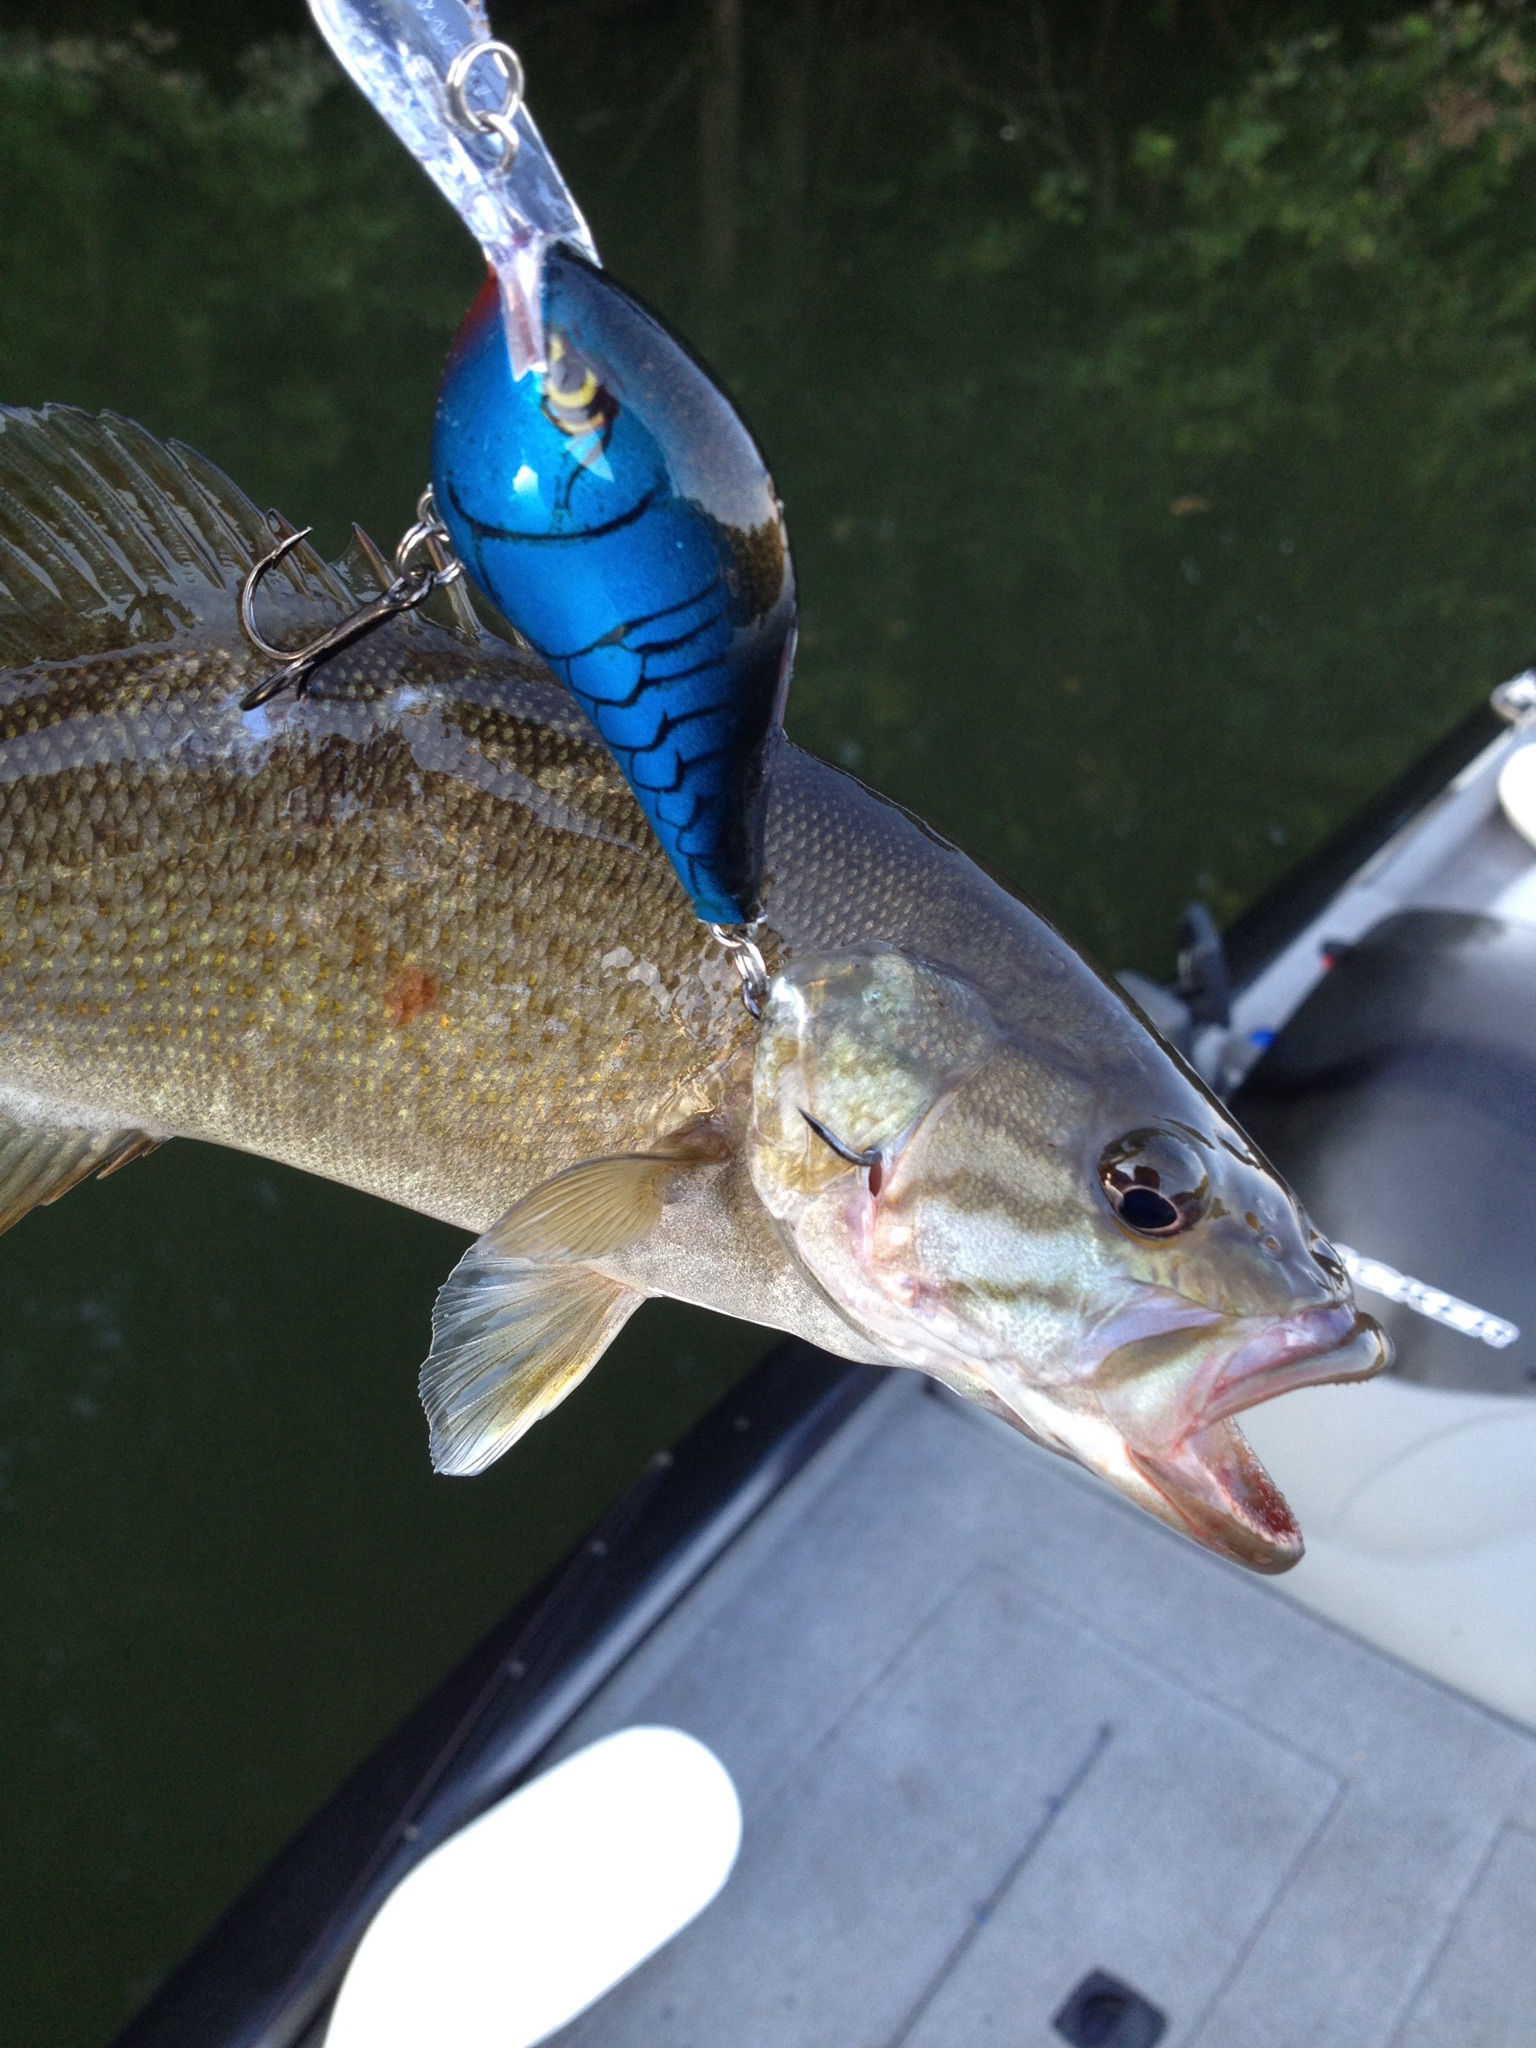 Have you ever caught a fish without hooking it in the mouth? - Page 2 -  General Bass Fishing Forum - Bass Fishing Forums